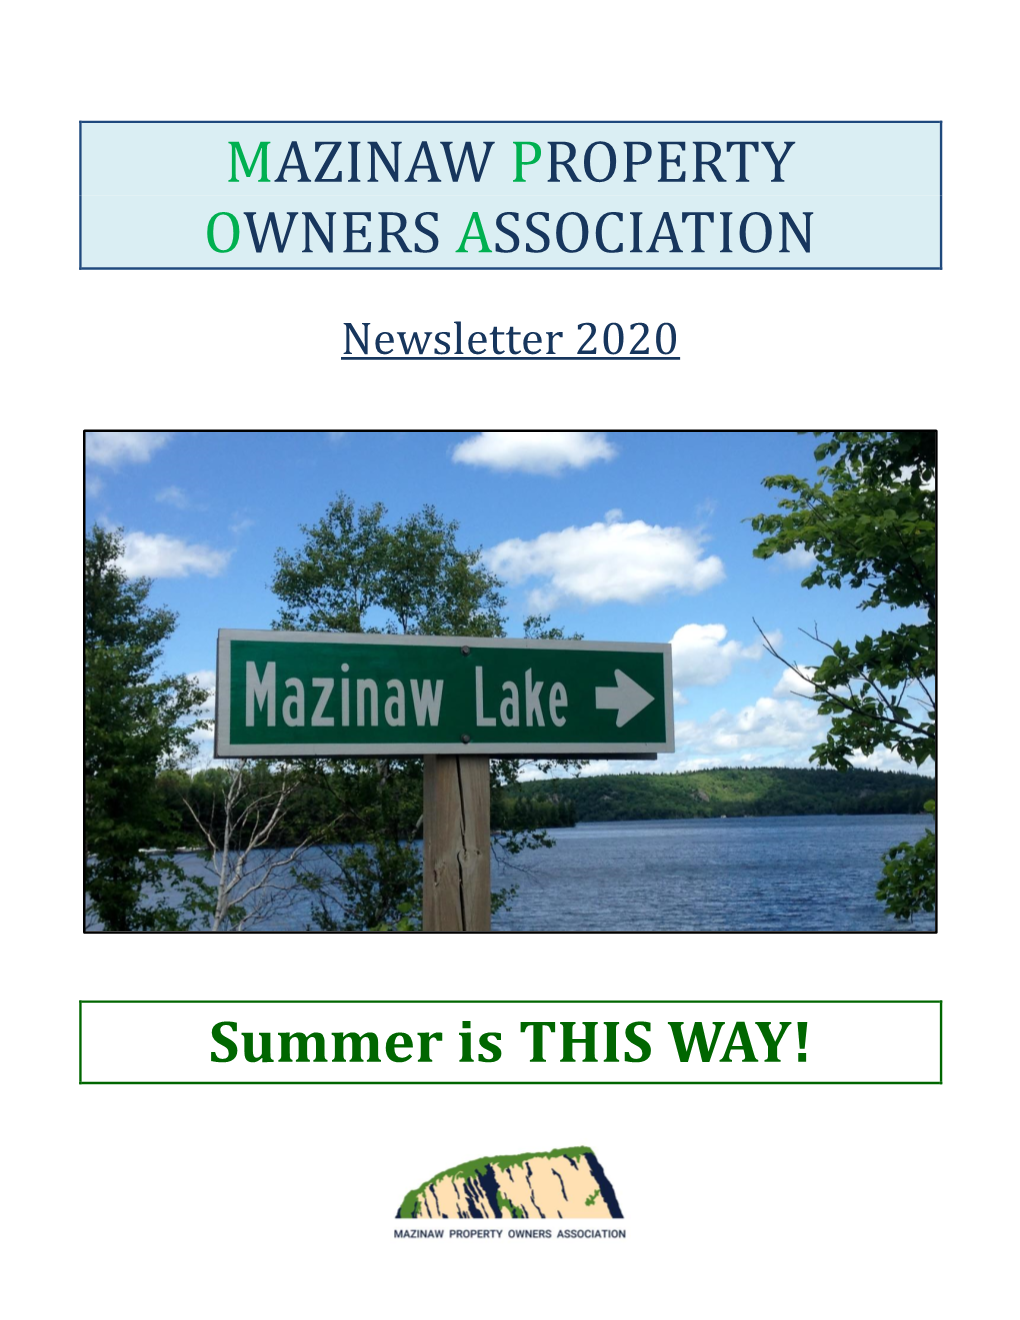 MAZINAW PROPERTY OWNERS ASSOCIATION Summer Is THIS WAY!